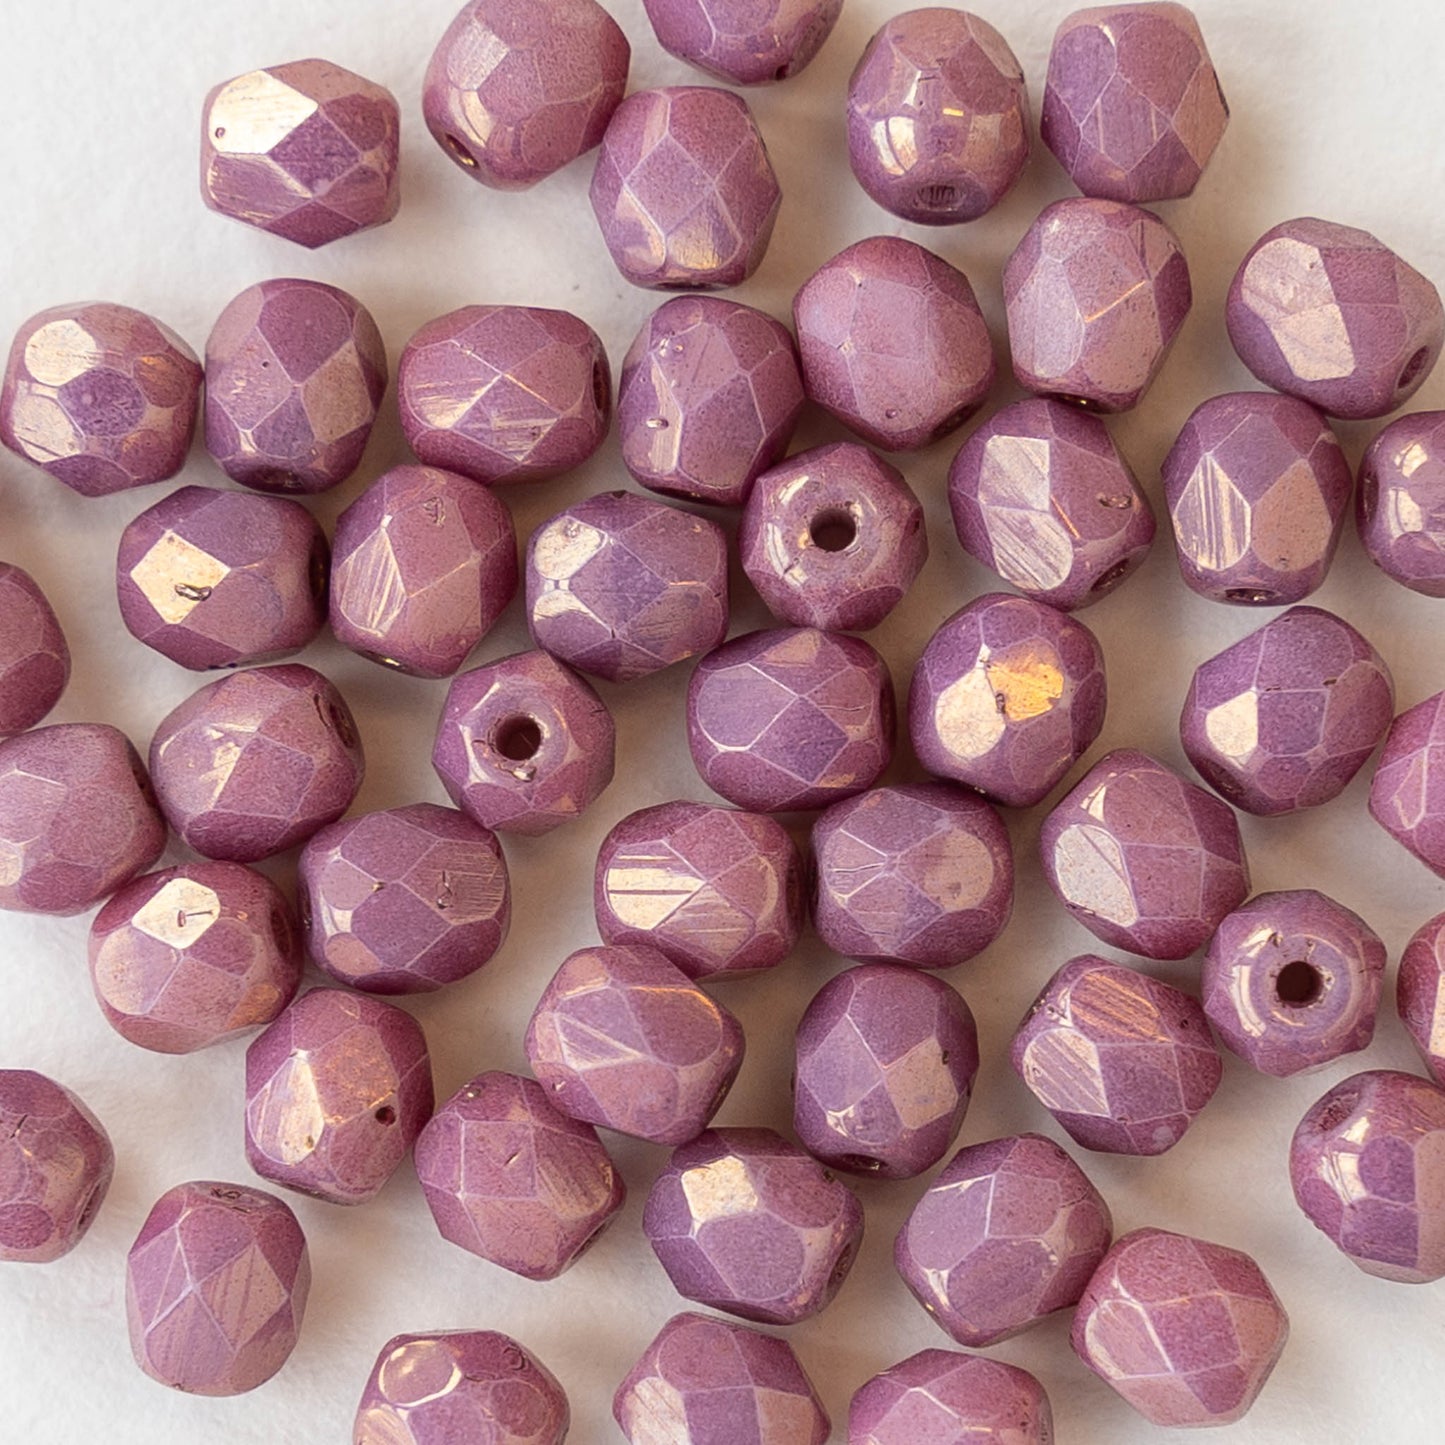 4mm Round Beads Firepolished - Pink Mauve Luster - 50 Beads